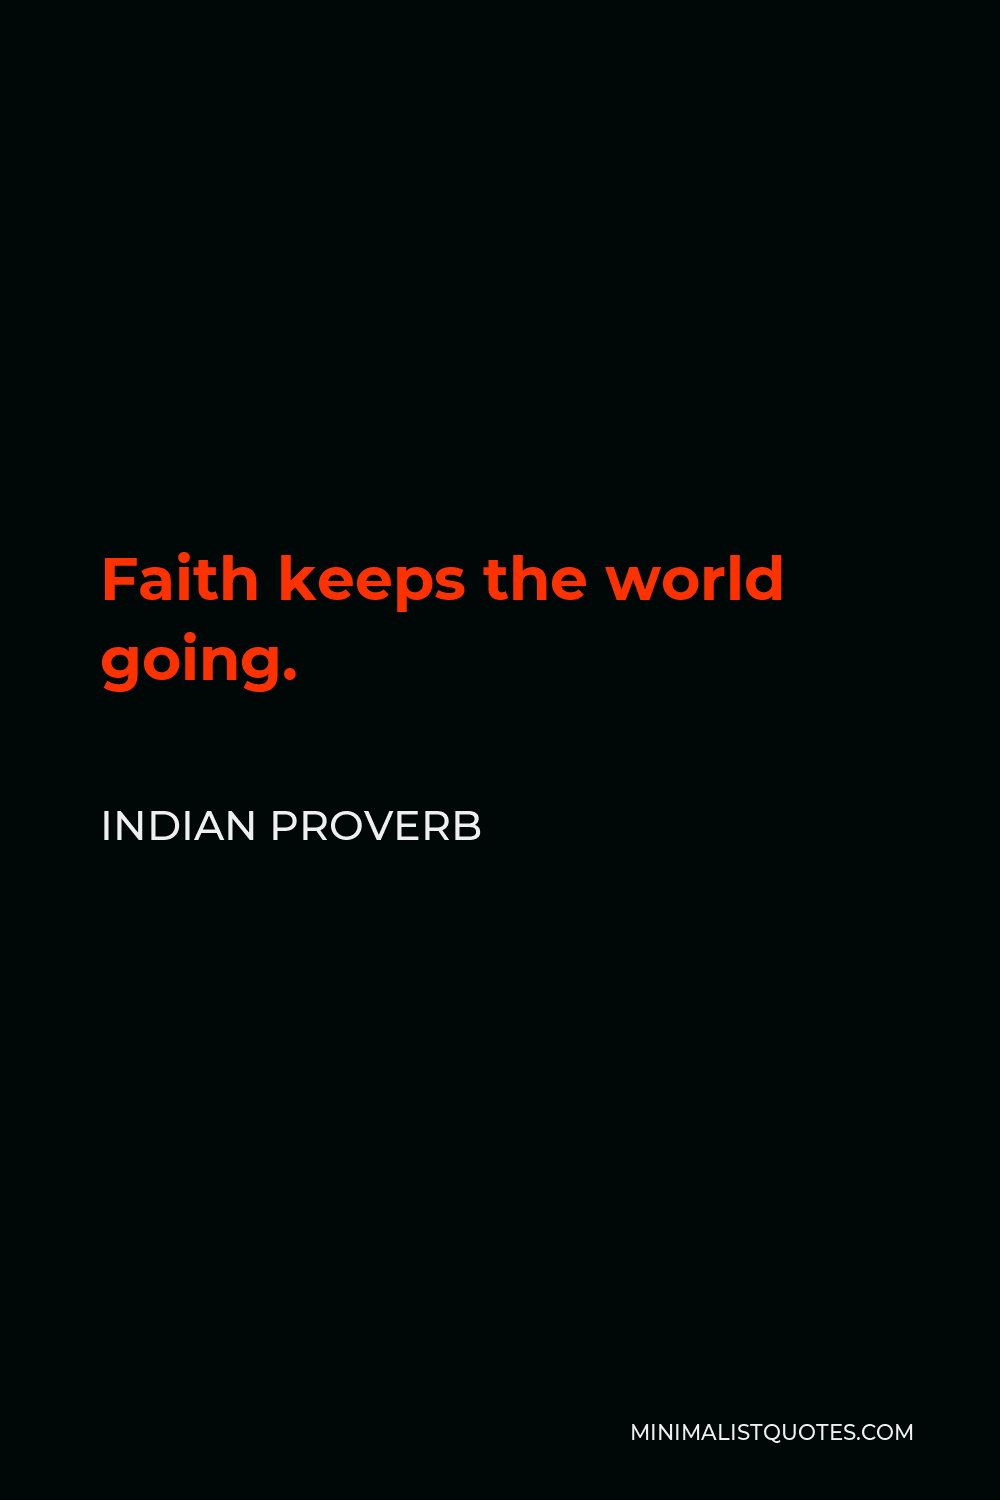 Indian Proverb Quote - Faith keeps the world going.